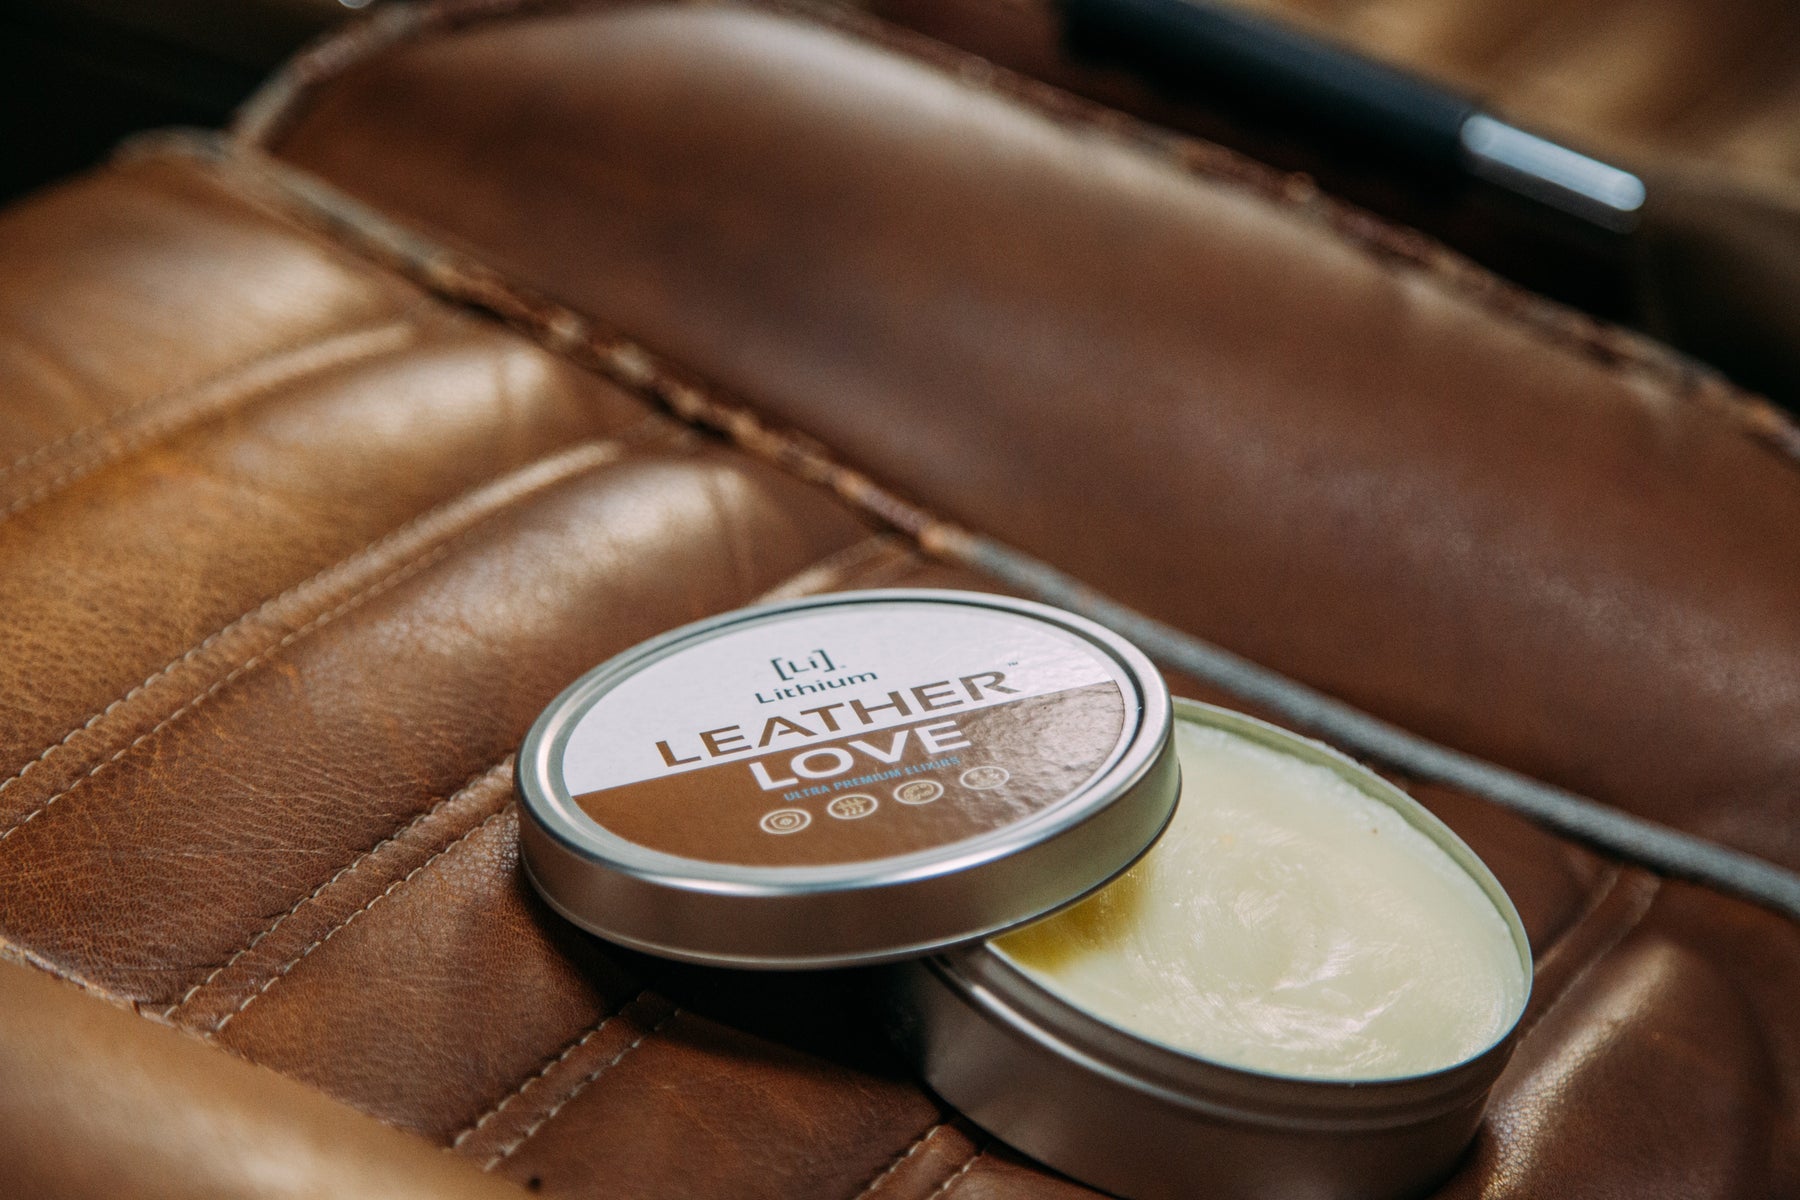 Lithium Auto Elixirs Leather Love - The Best Leather Conditioner on The Planet, Brings Old Leather Ba